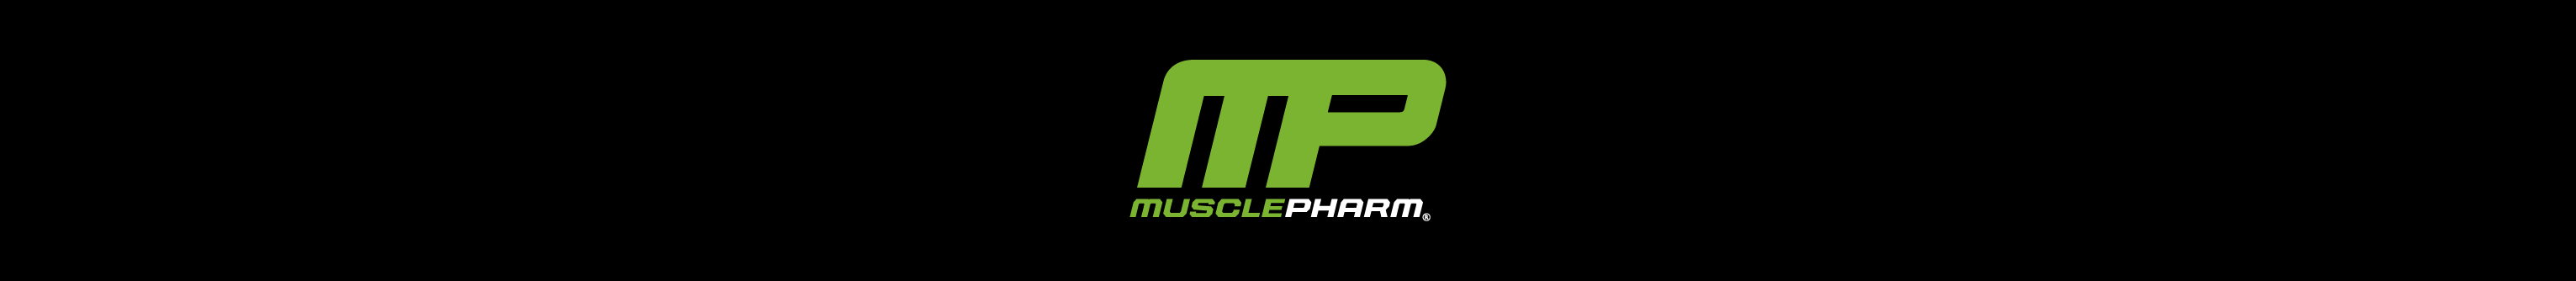 MusclePharm Protein Powder Pre Workout Supplements